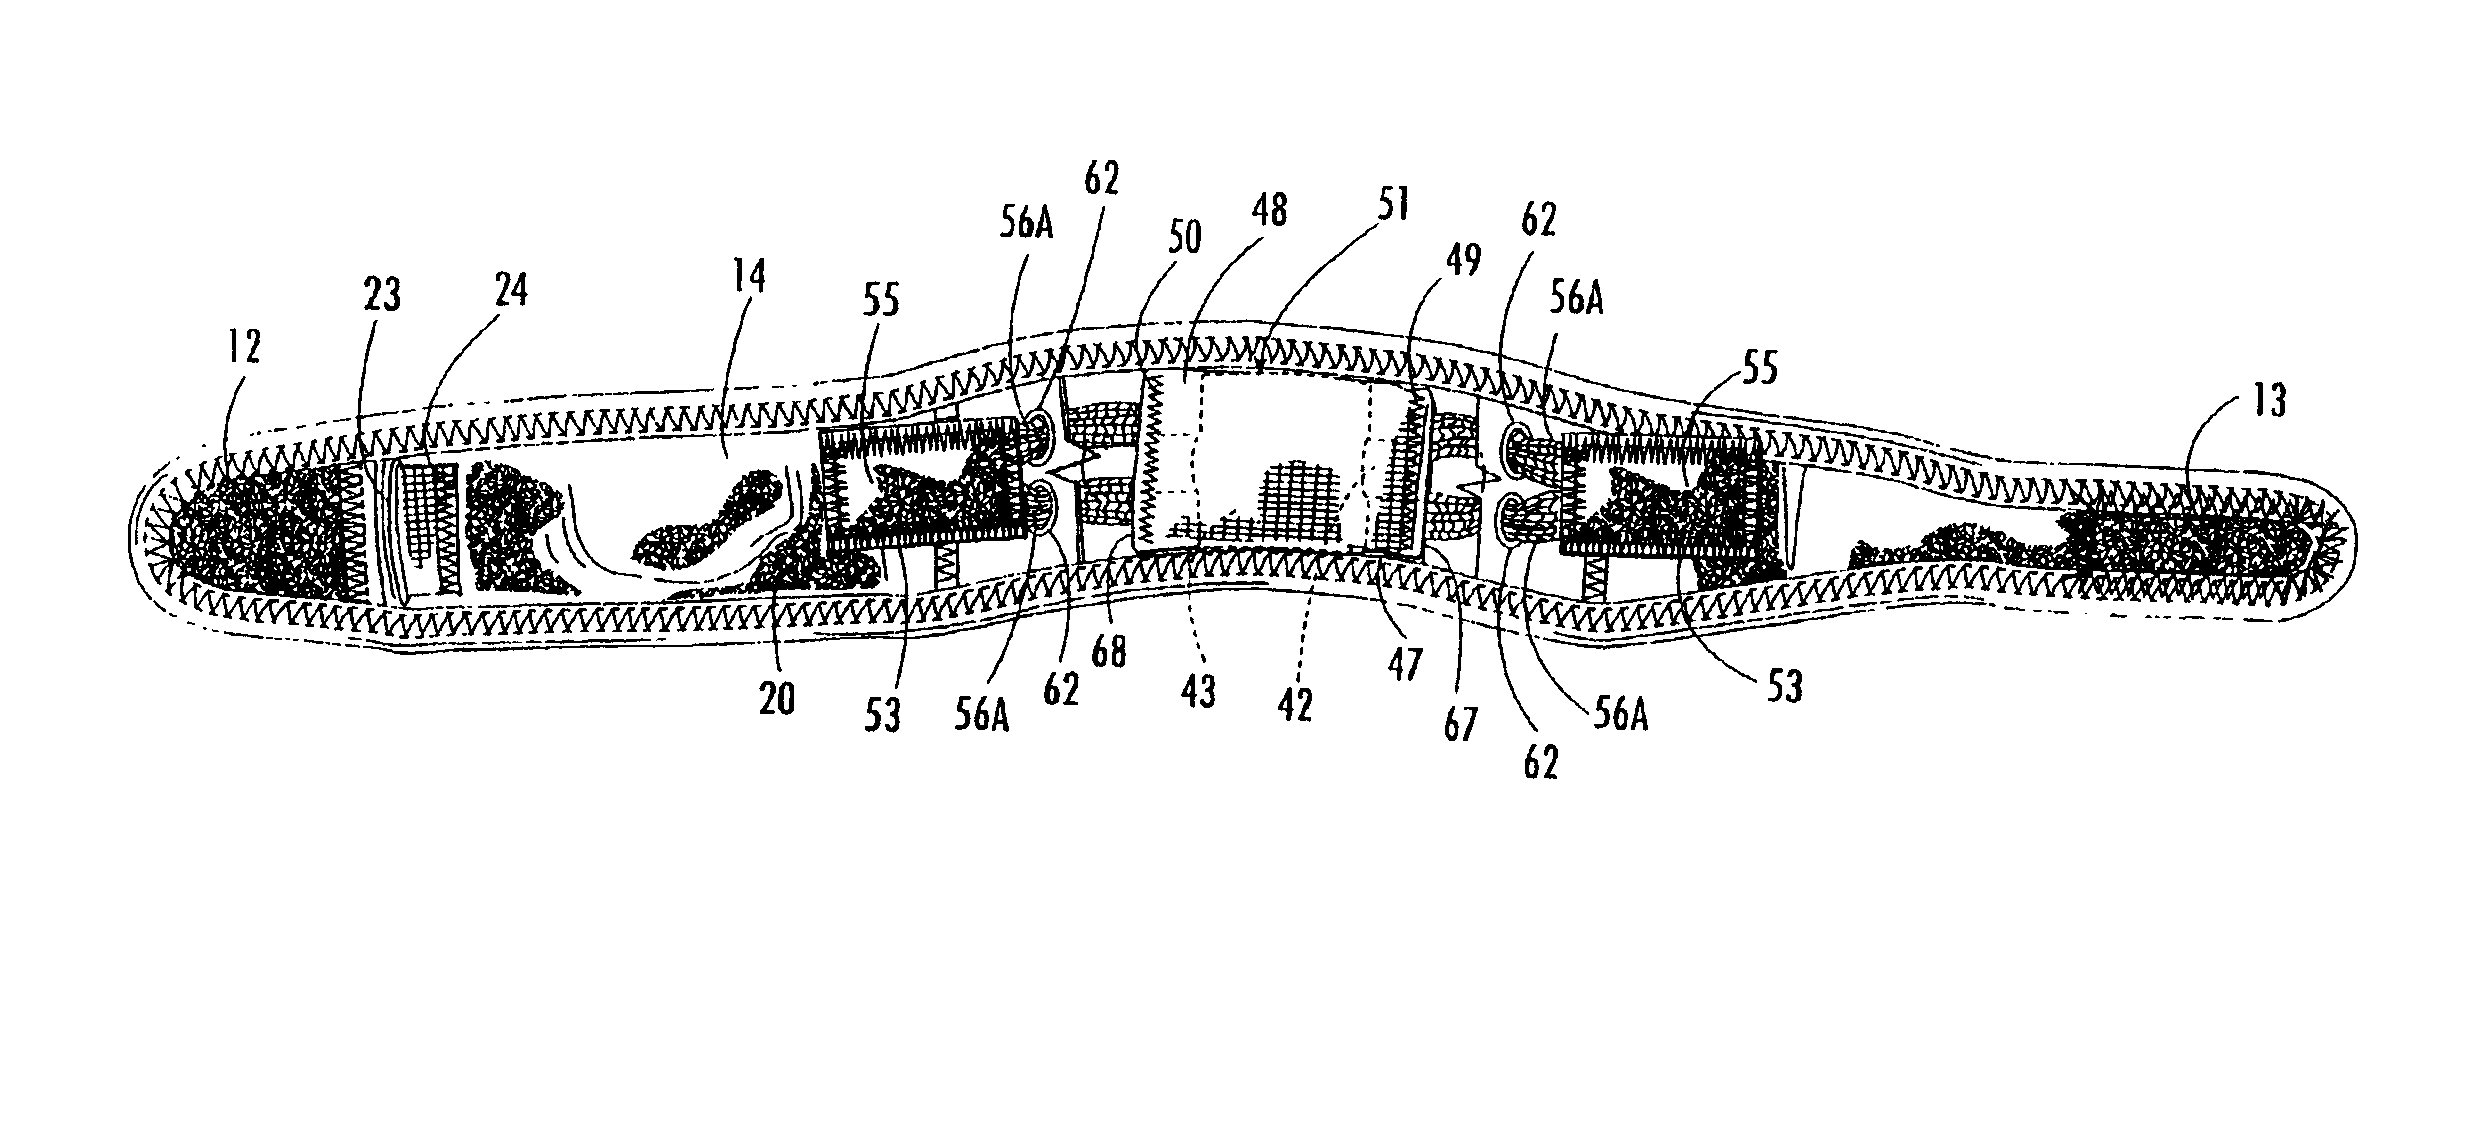 Knee support device for applying radial pressure